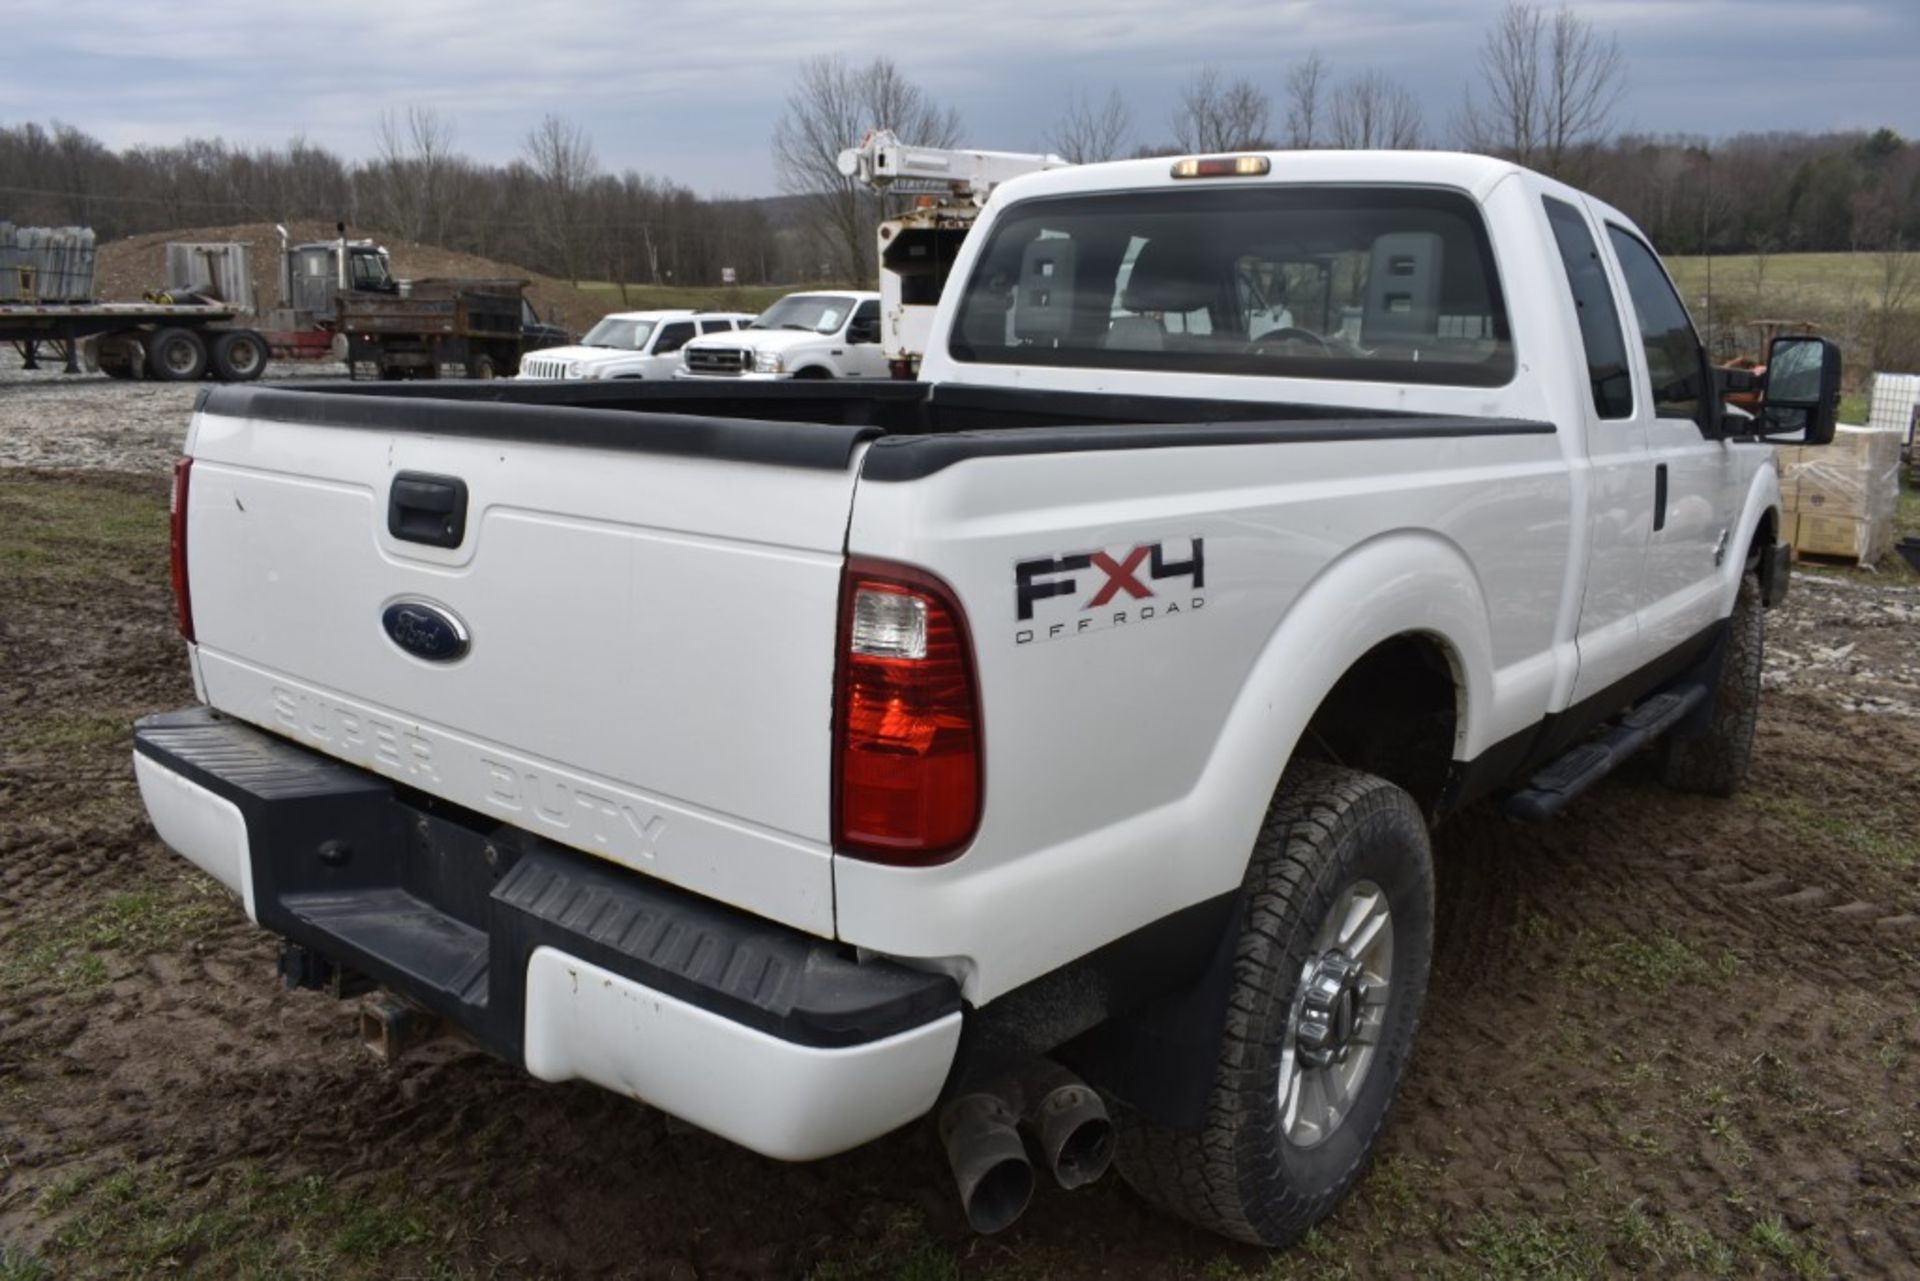 2011 Ford F-250 Super Duty Truck - Image 11 of 40